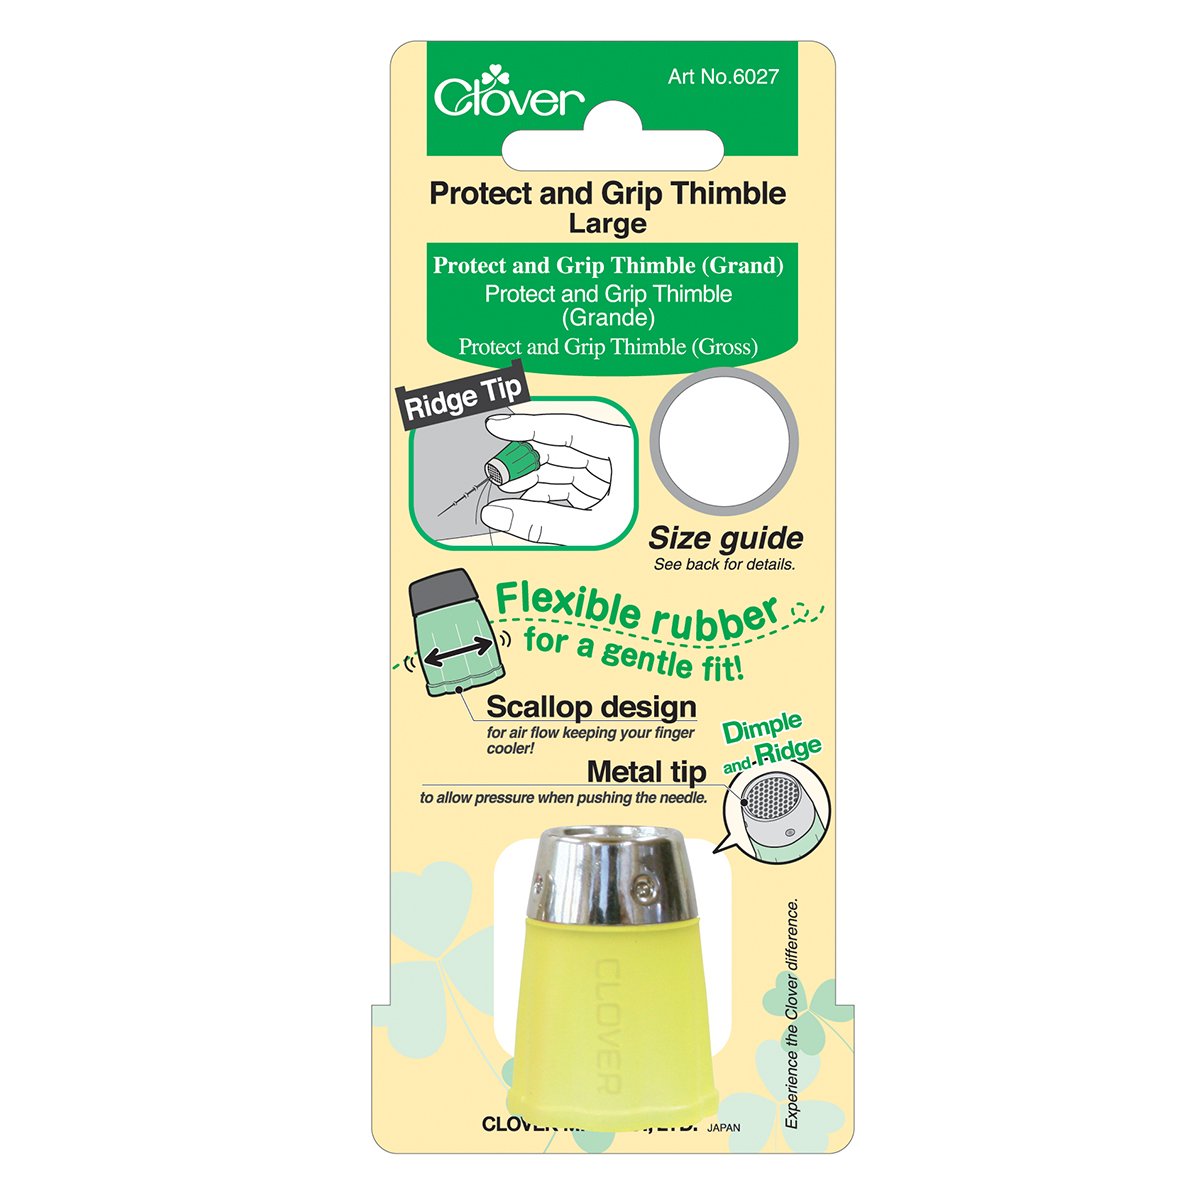 Protect and Grip Thimble (Large) – Clover Needlecraft, Inc.